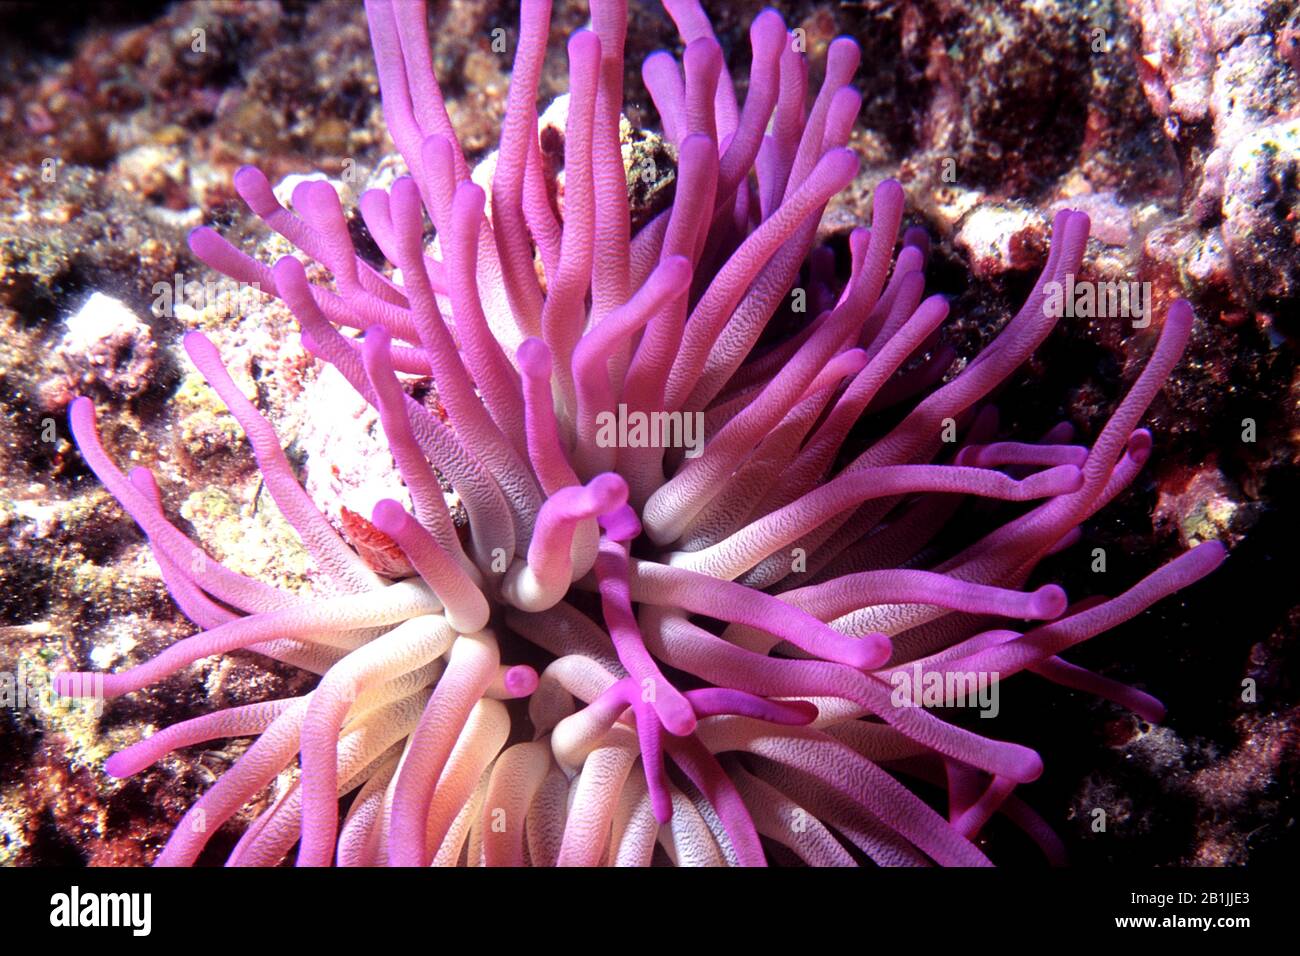 giant Caribbean anemone, pink-tipped anemone, condy anemone, Atlantic anemone (Condylactis gigantea), Netherlands Antilles, Curacao Stock Photo